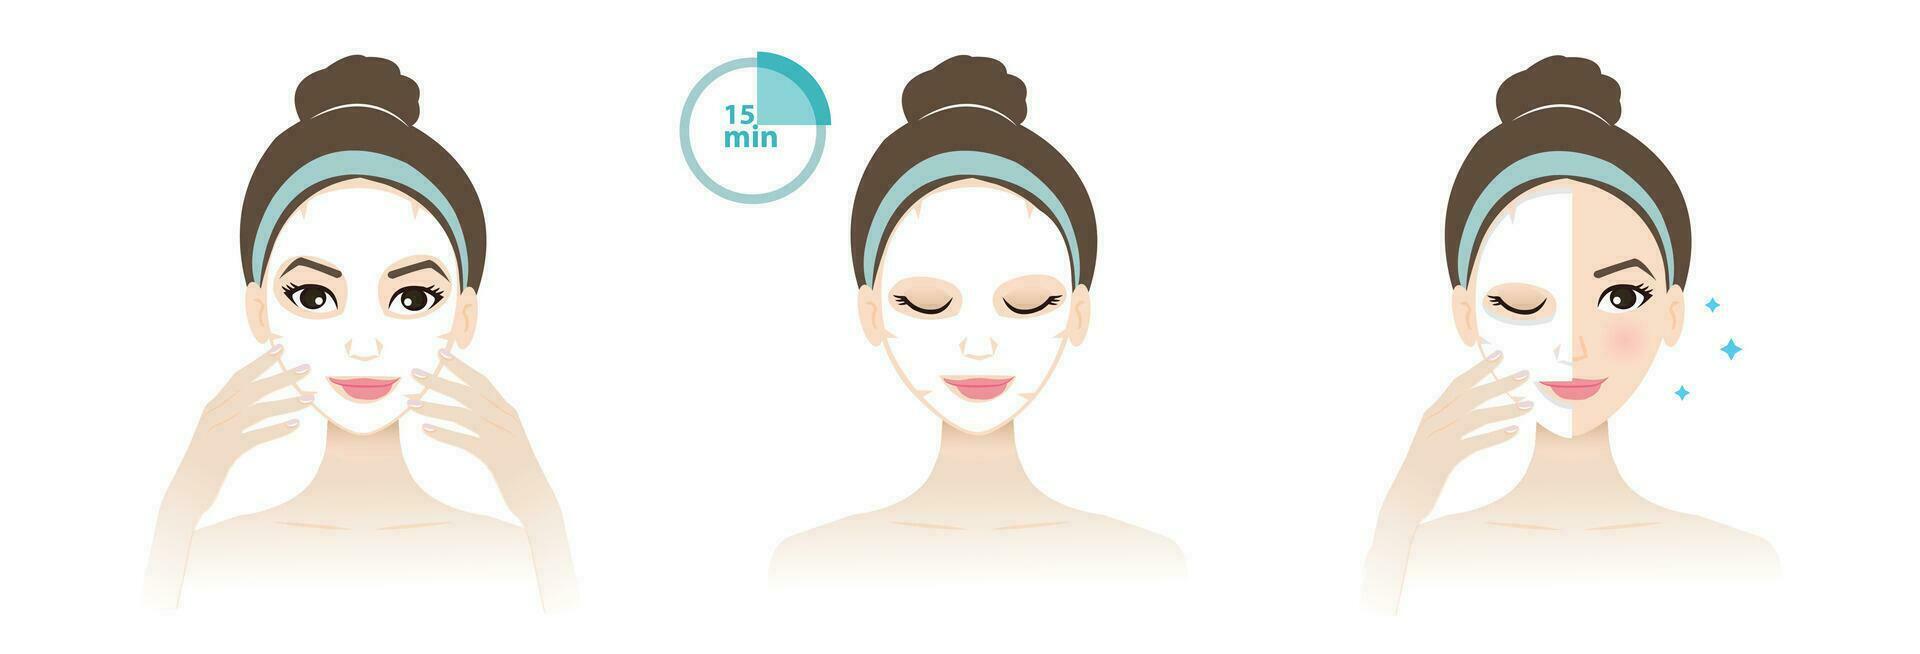 Direction for use facial sheet mask on face vector illustration isolated on white background. Cute woman apply sheet mask on skin, leave it for 15 minutes, remove it and reveal beauty skin.